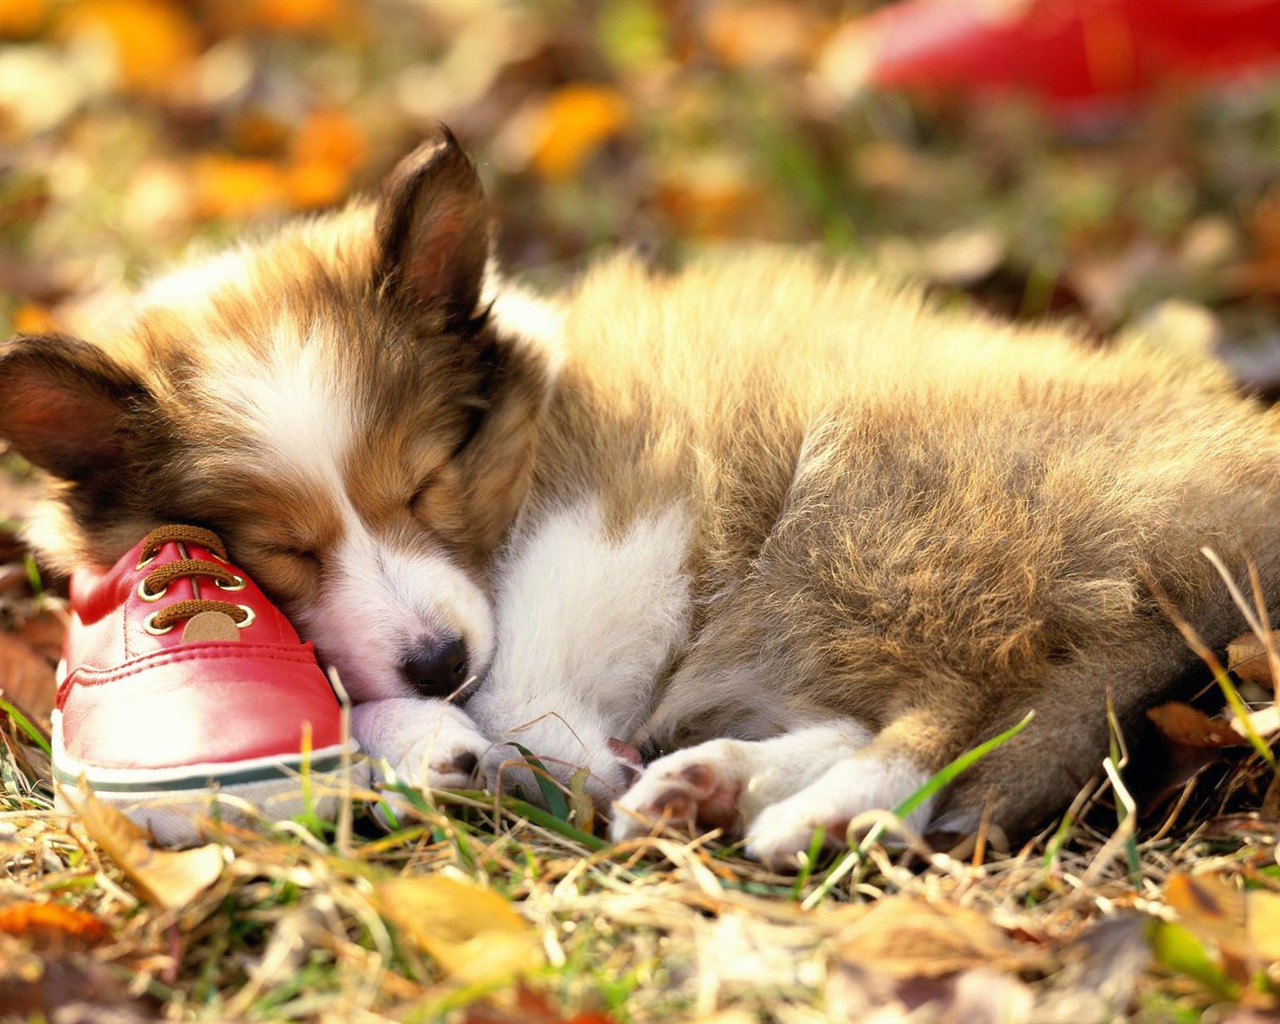 Puppy Photo HD wallpapers (3) #14 - 1280x1024